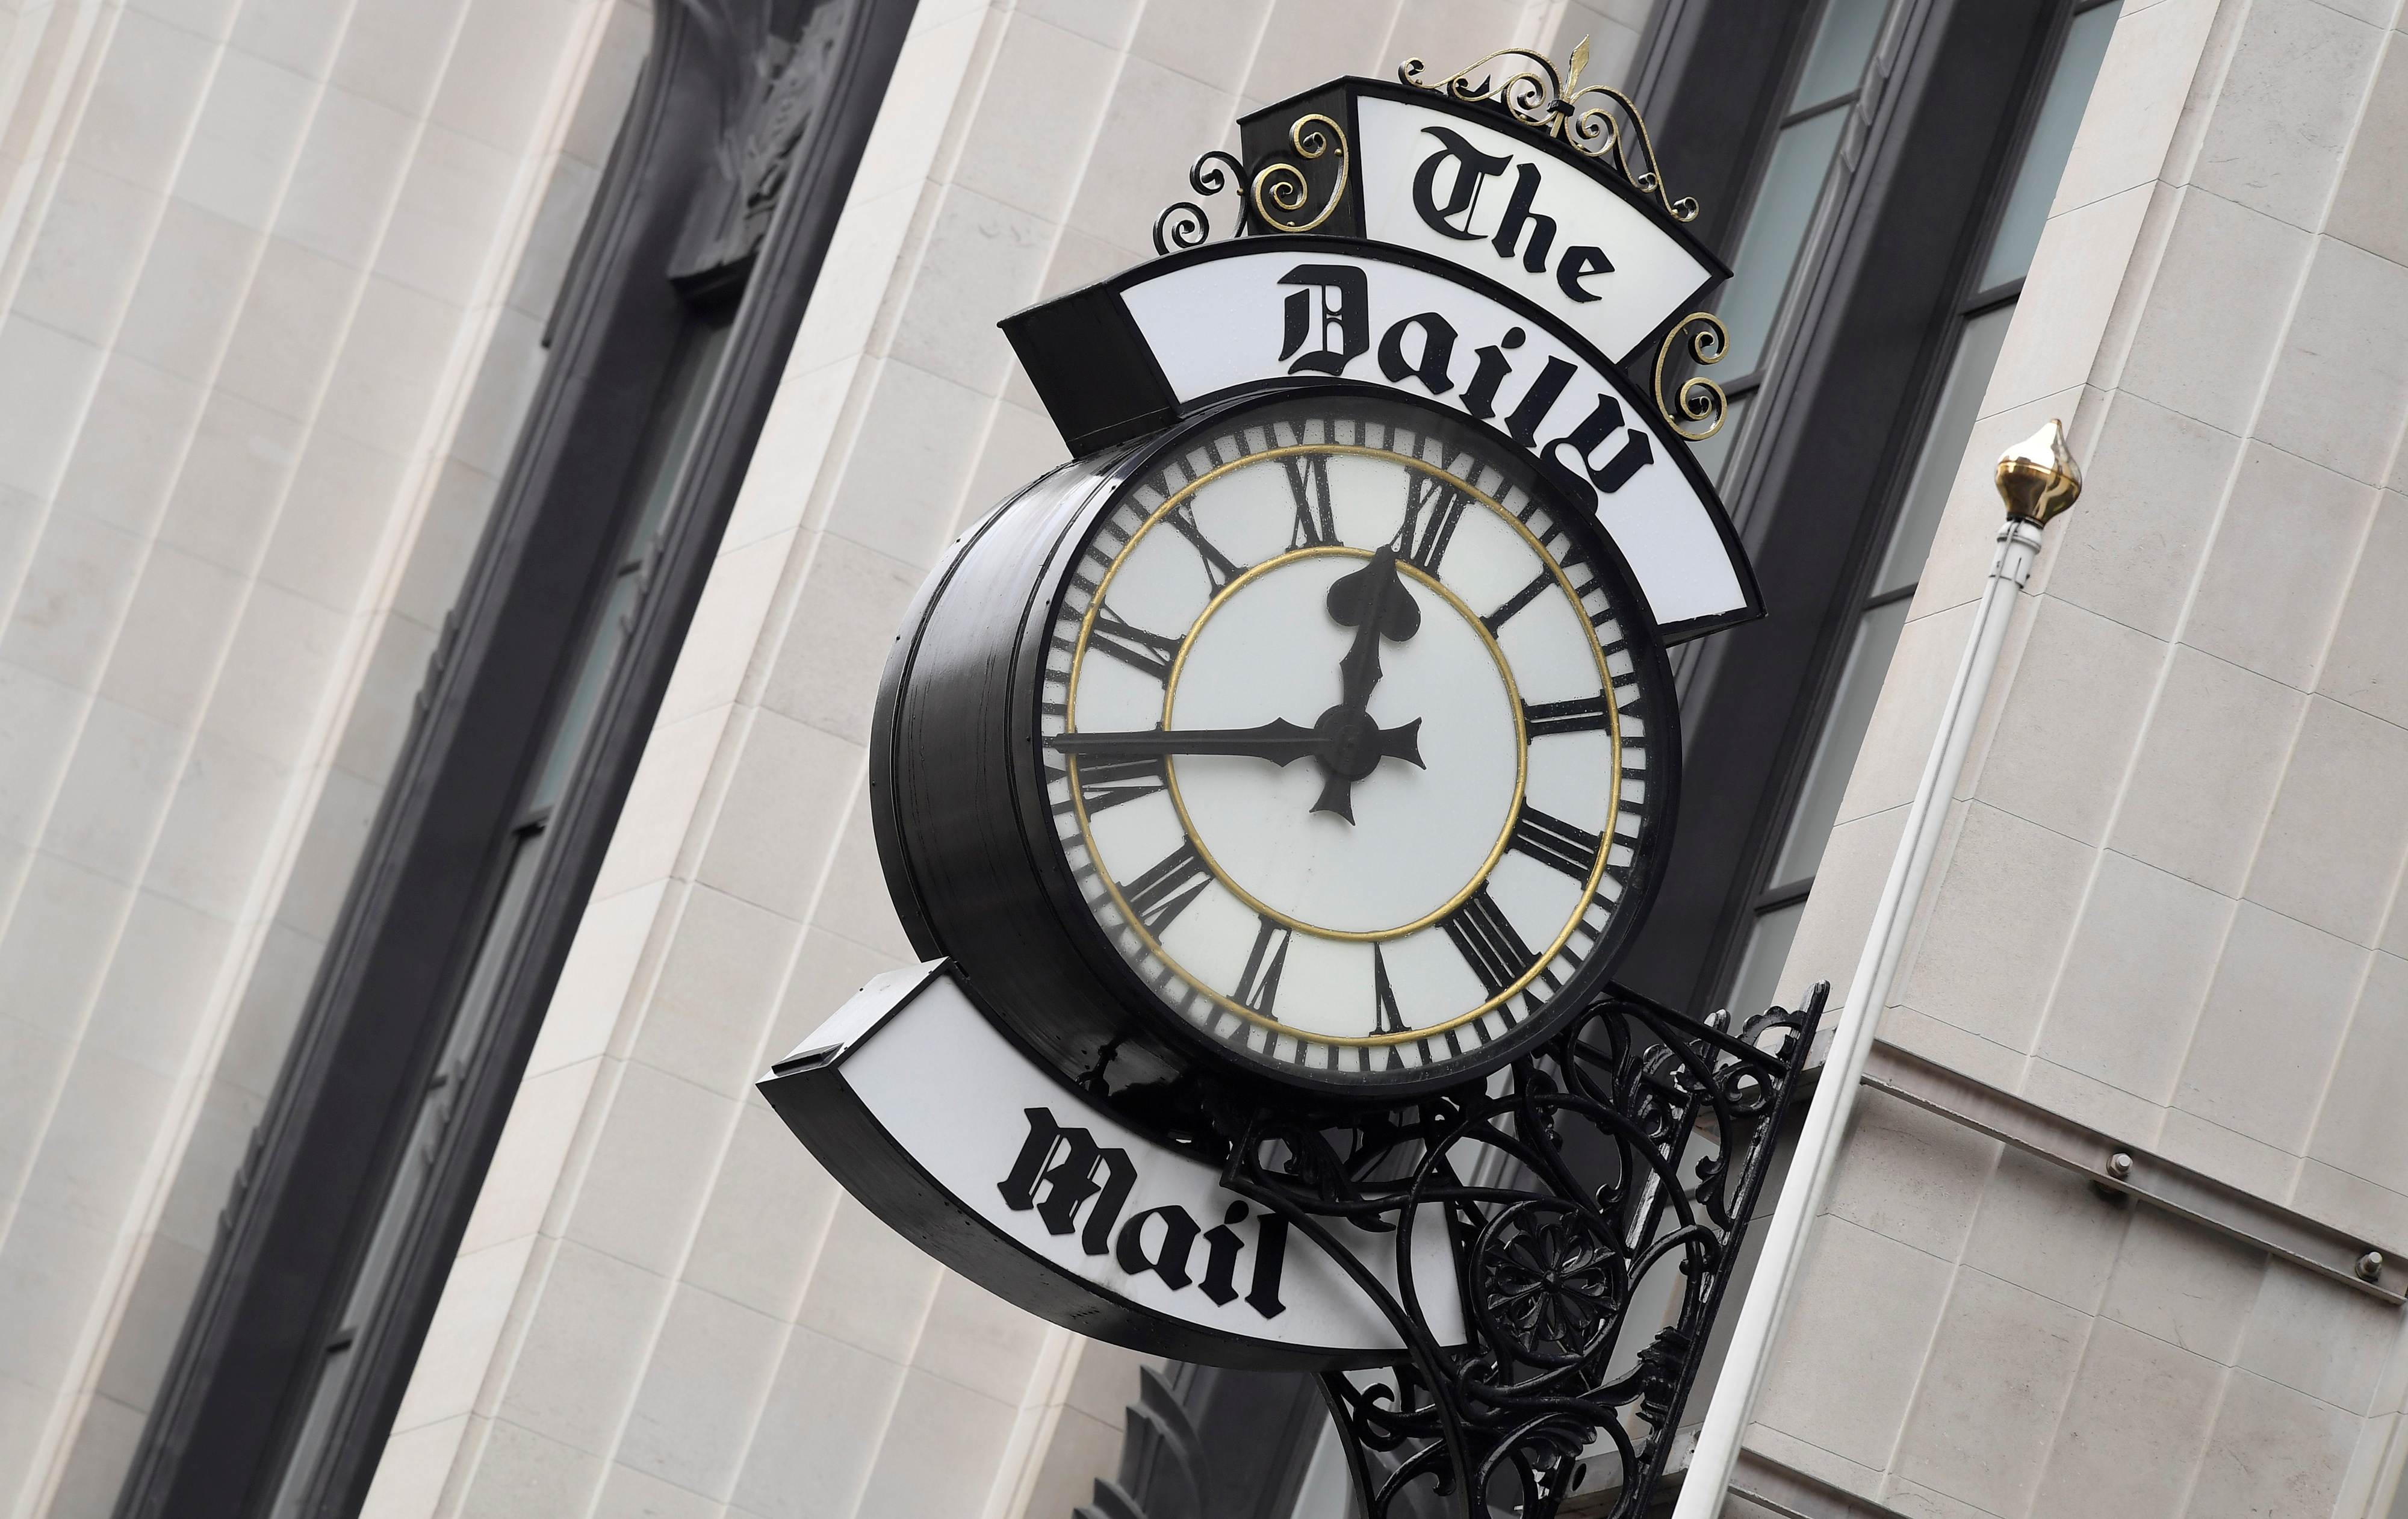 A clock face is seen outside of the London offices of the Daily Mail newspaper in London, Britain